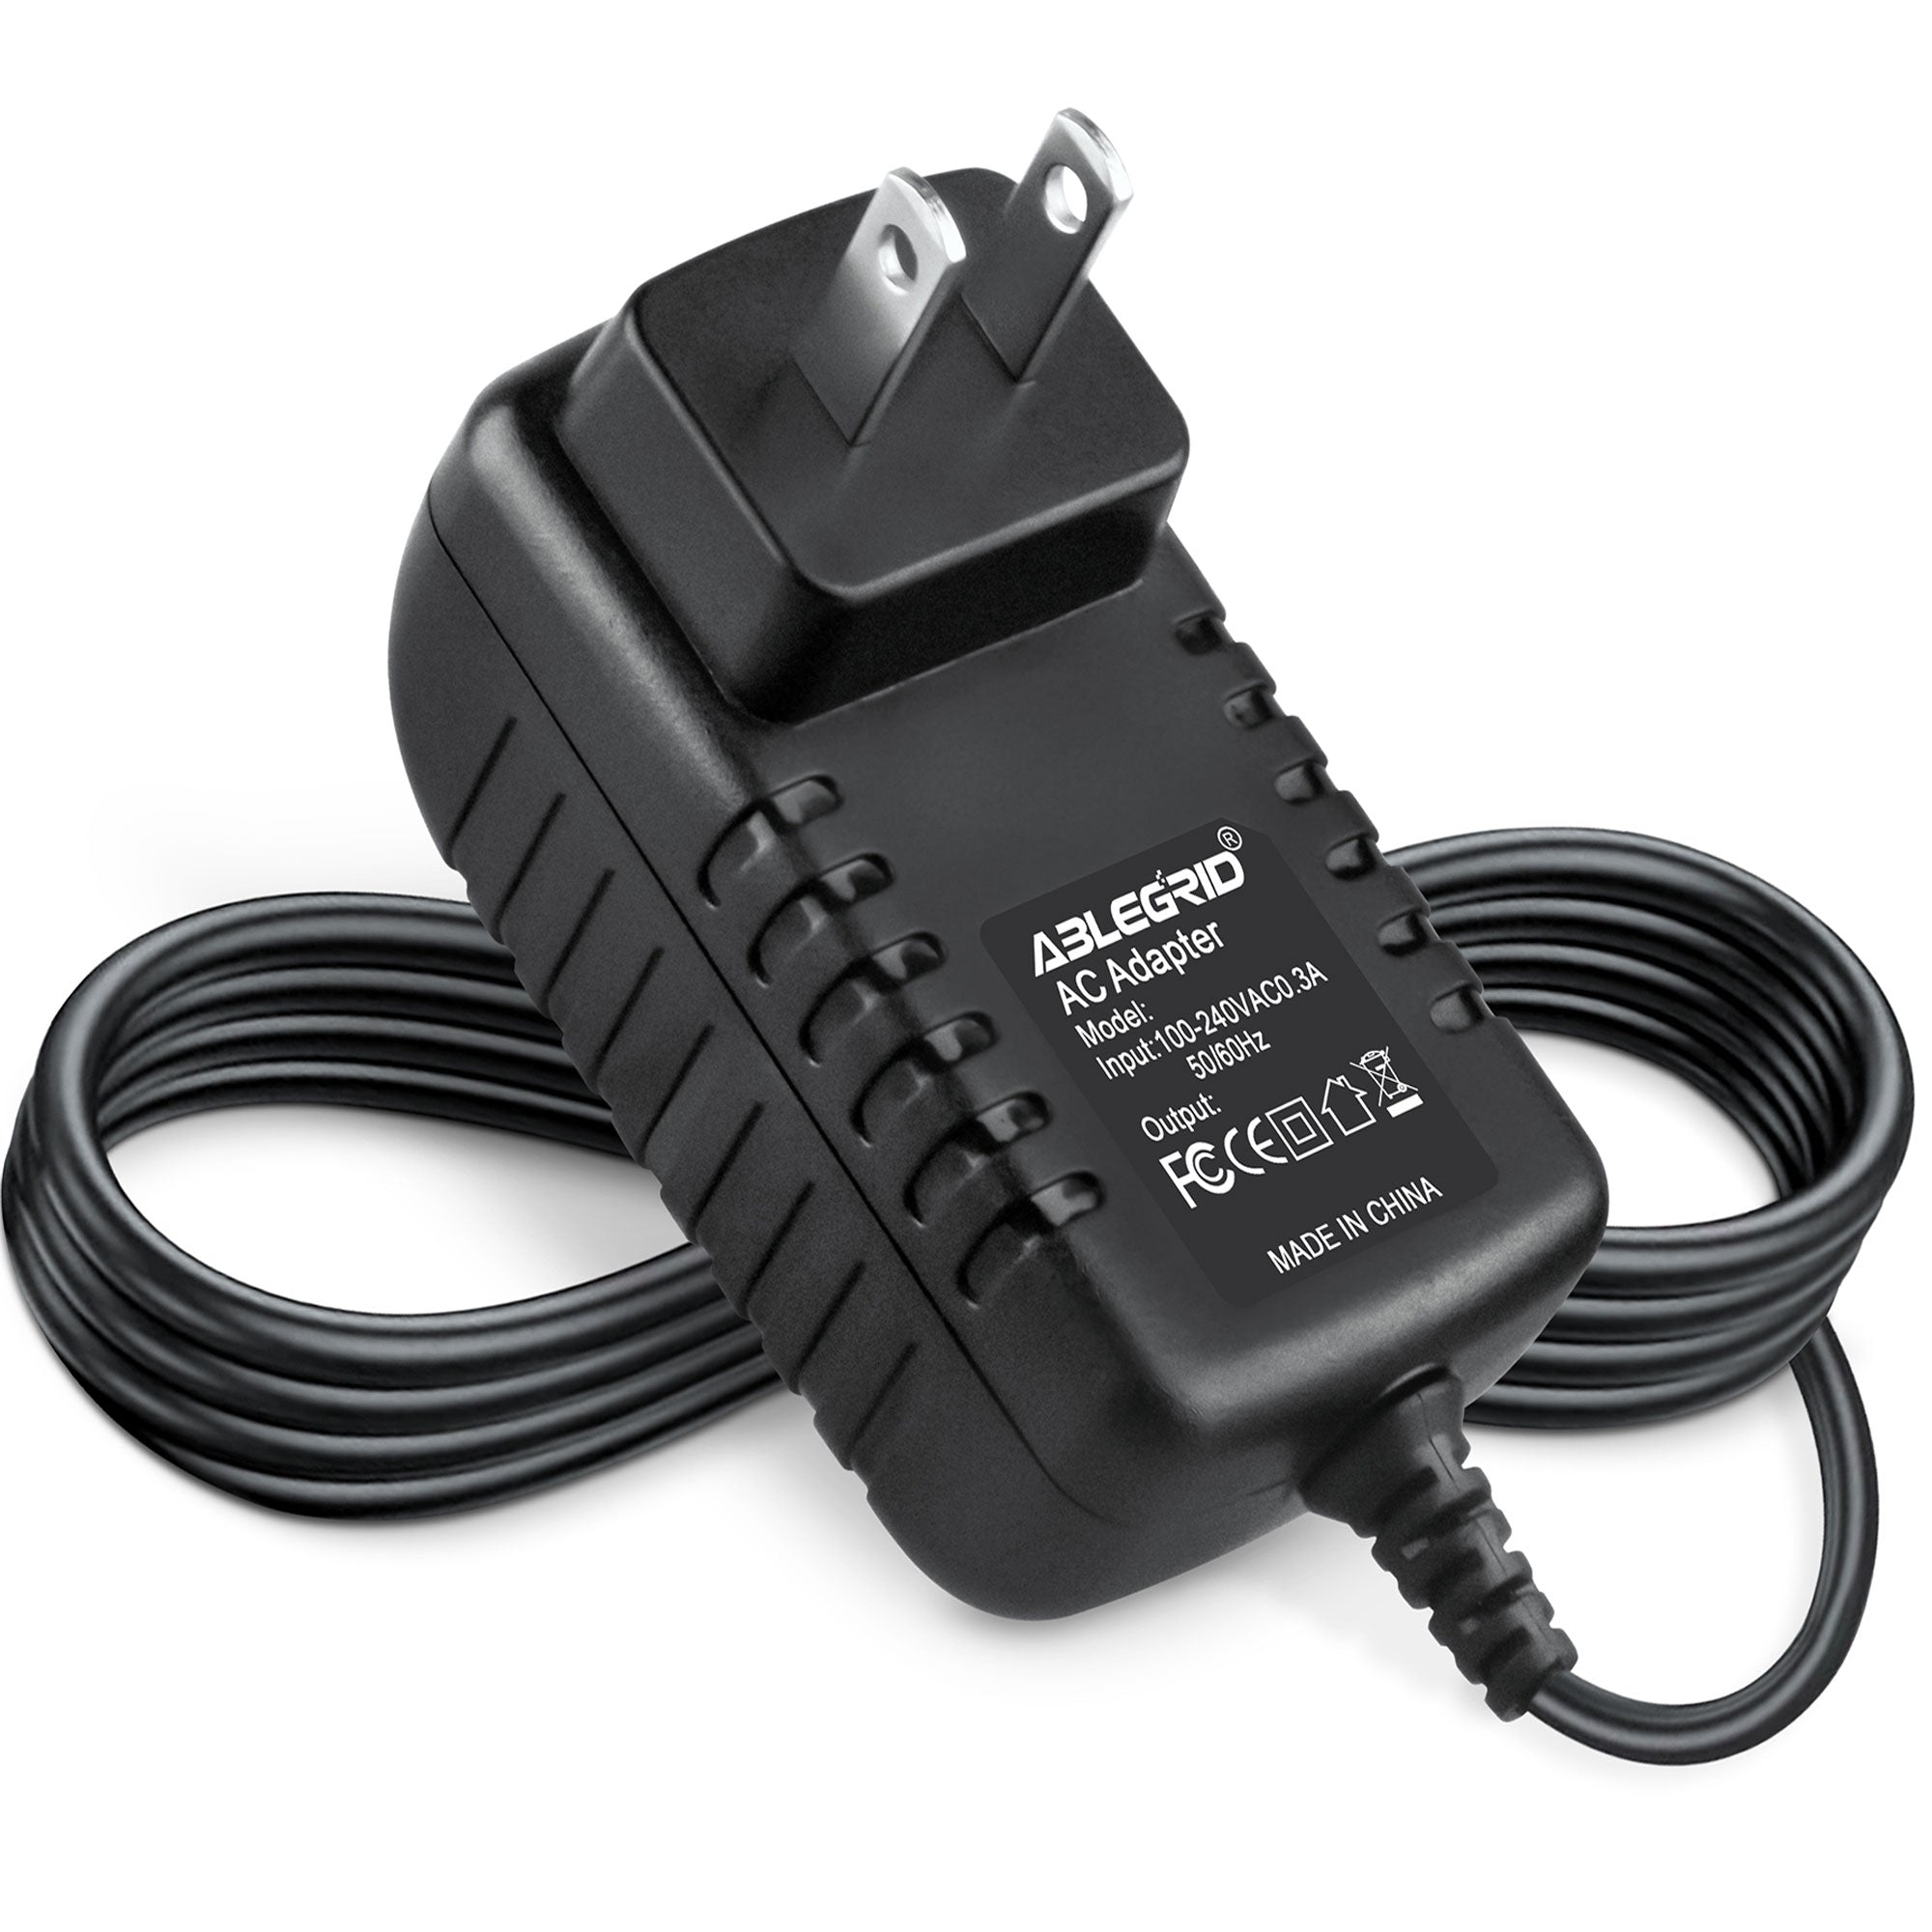 AbleGrid AC / DC Adapter for On Time Model: 8024DP1502000 B024DP1502000 P/N: 700-0075-002 7000075002 Switching Power Supply Cord Cable PS Charger Mains PSU